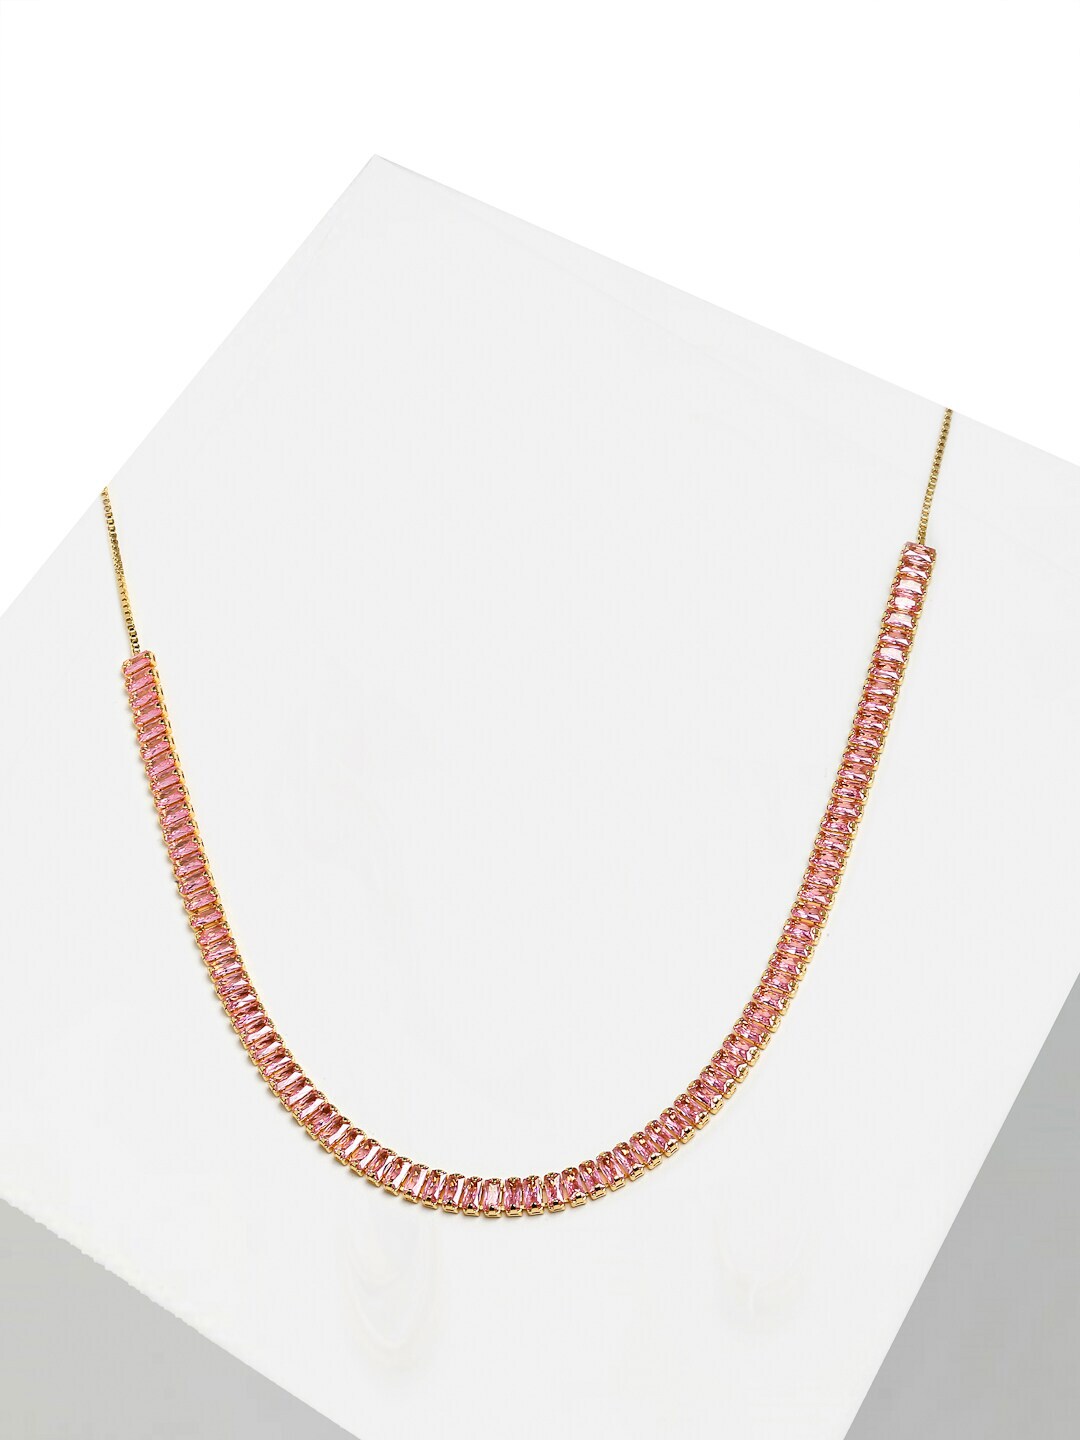 AVANT-GARDE PARIS Women Gold Plated Crystal Studded Statement Choker Necklace Price in India